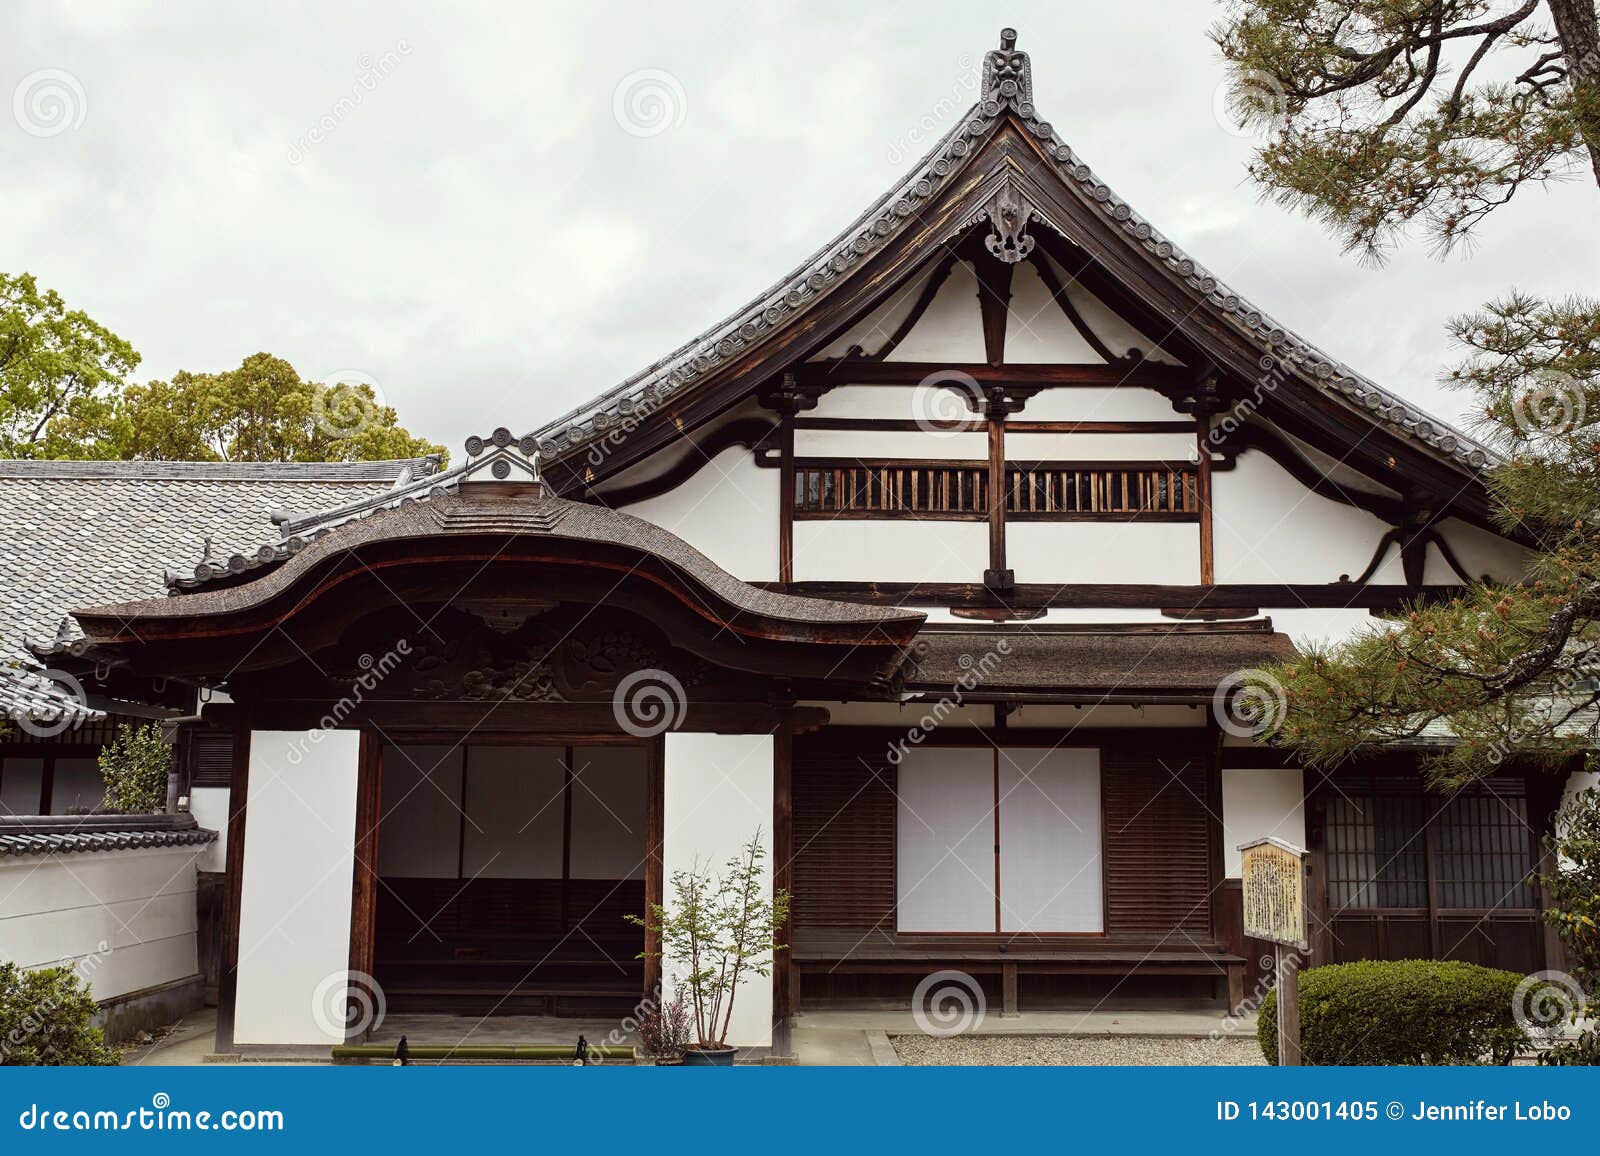 Traditional Japanese Architecture In The Byodoin Complex Stock Image